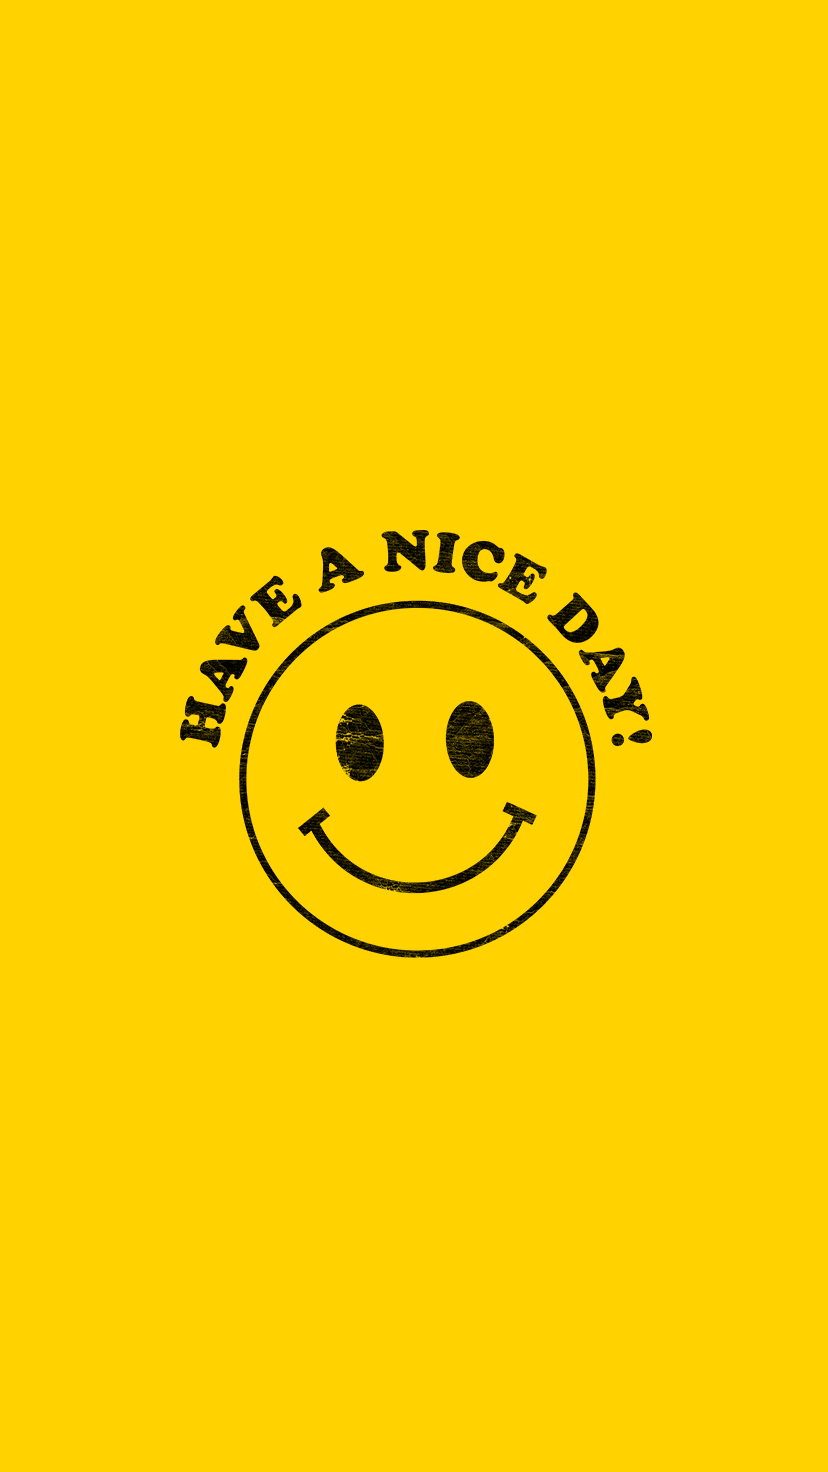 Have A Good Day Wallpaper Free Have A Good Day Background